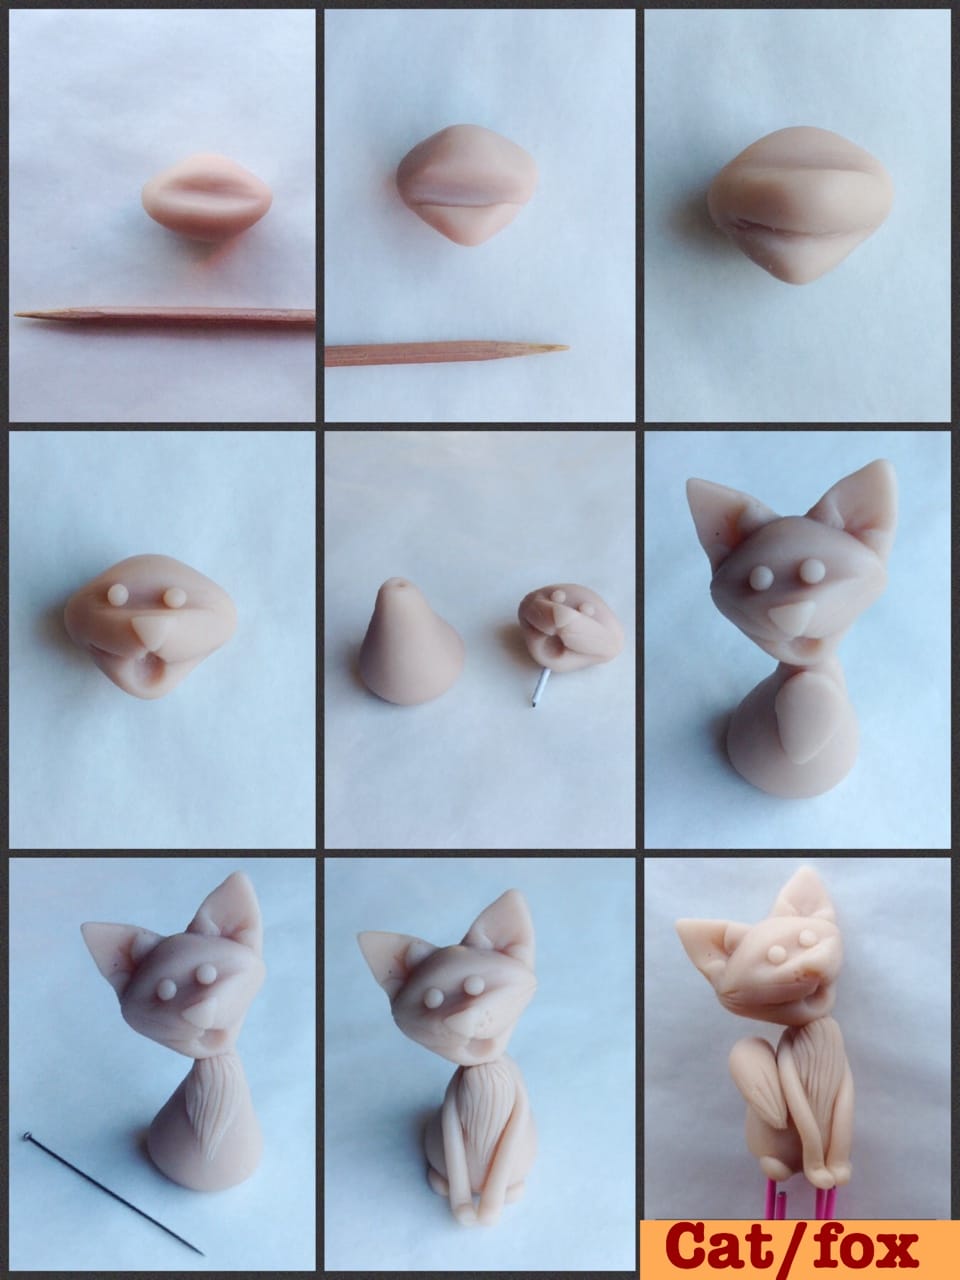 My Collection Of Dog And Cat Sculptures That I Made From Polymer